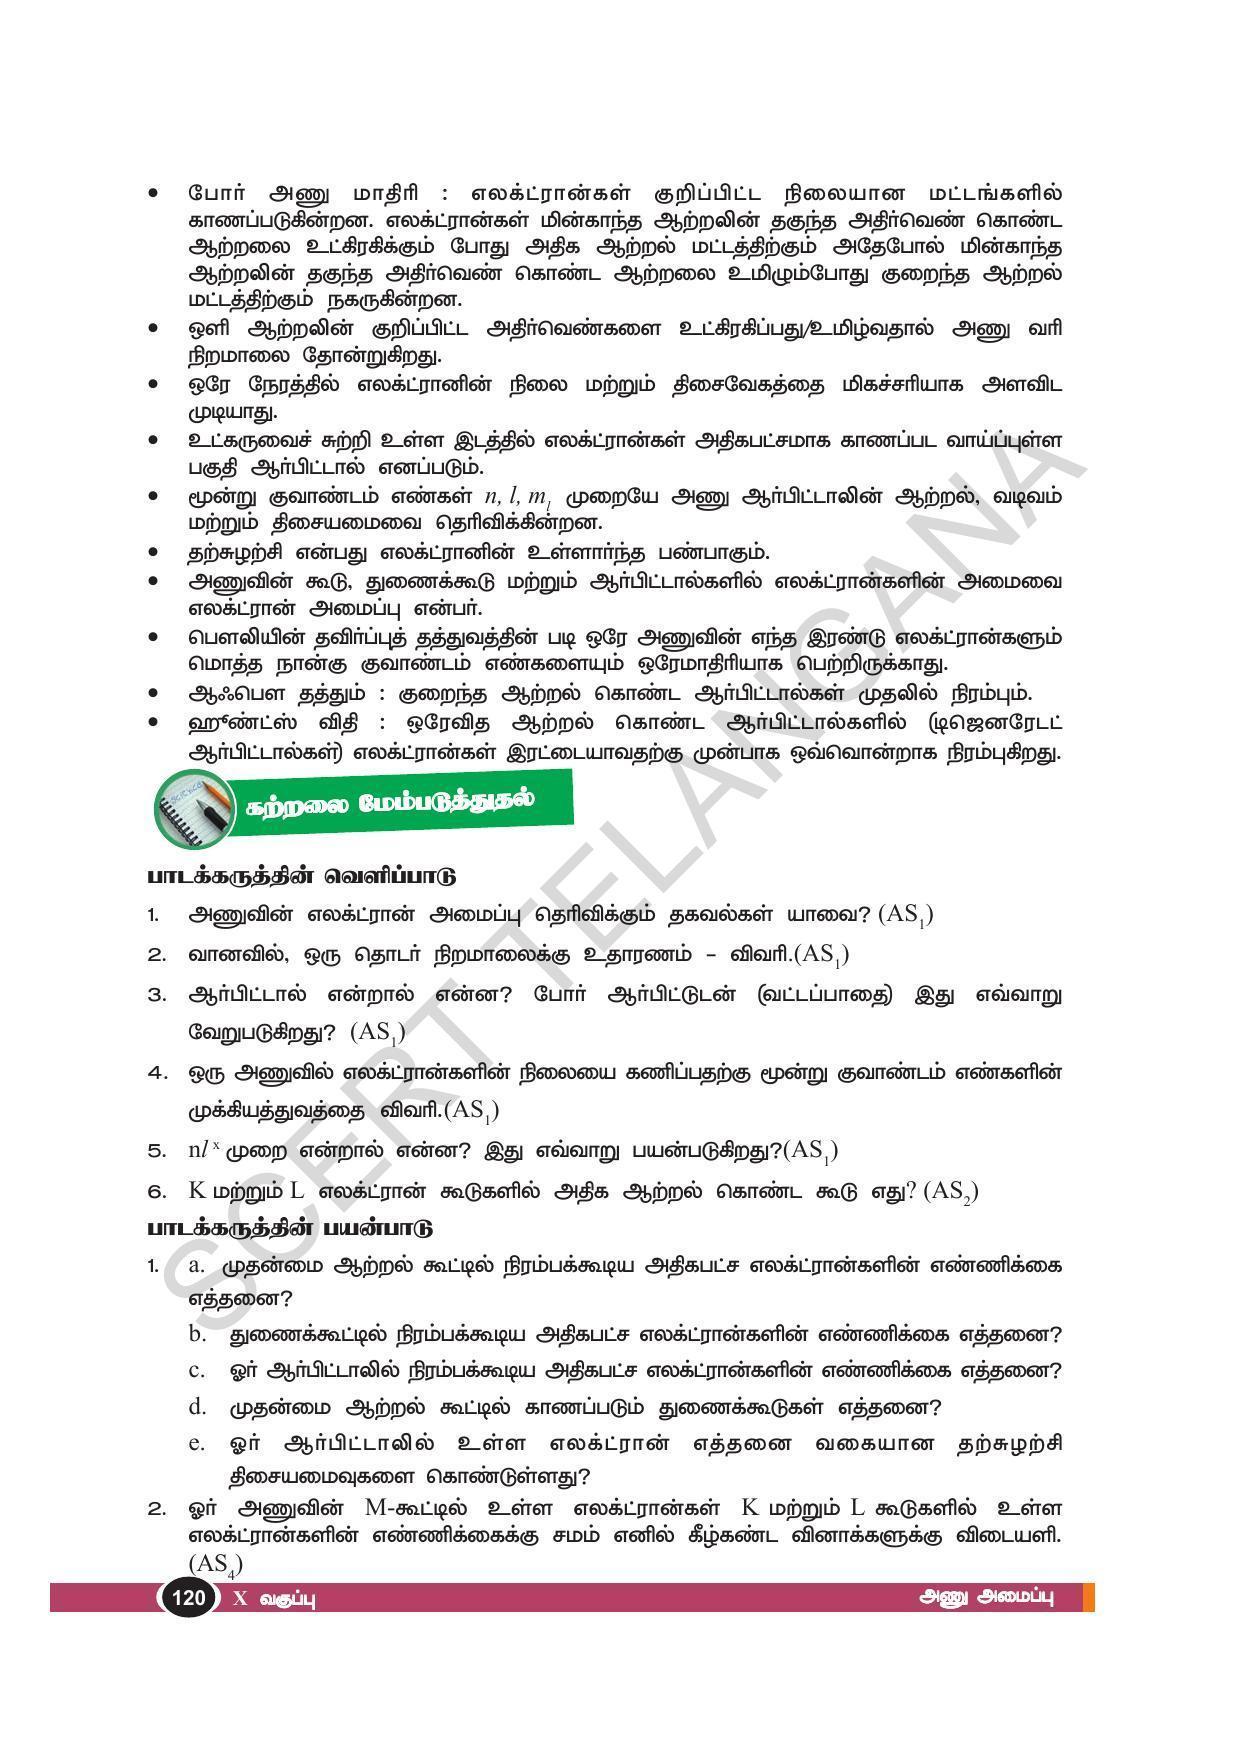 TS SCERT Class 10 Physical Science(Tamil Medium) Text Book - Page 132